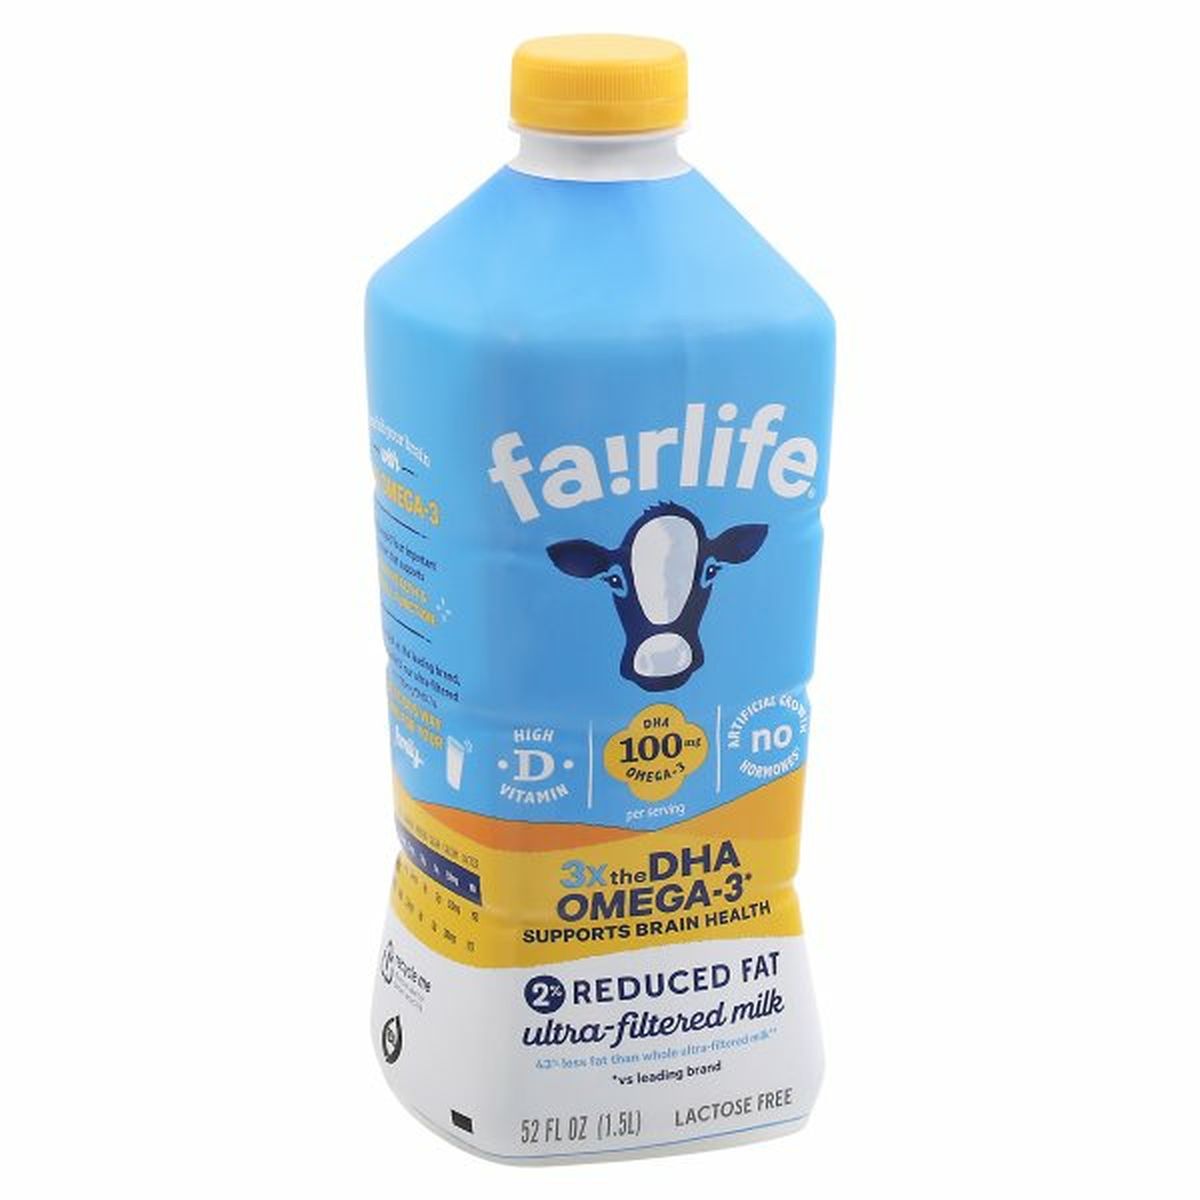 Calories in fairlife Milk, Ultra-Filtered, Lactose Free, 2% Reduced Fat